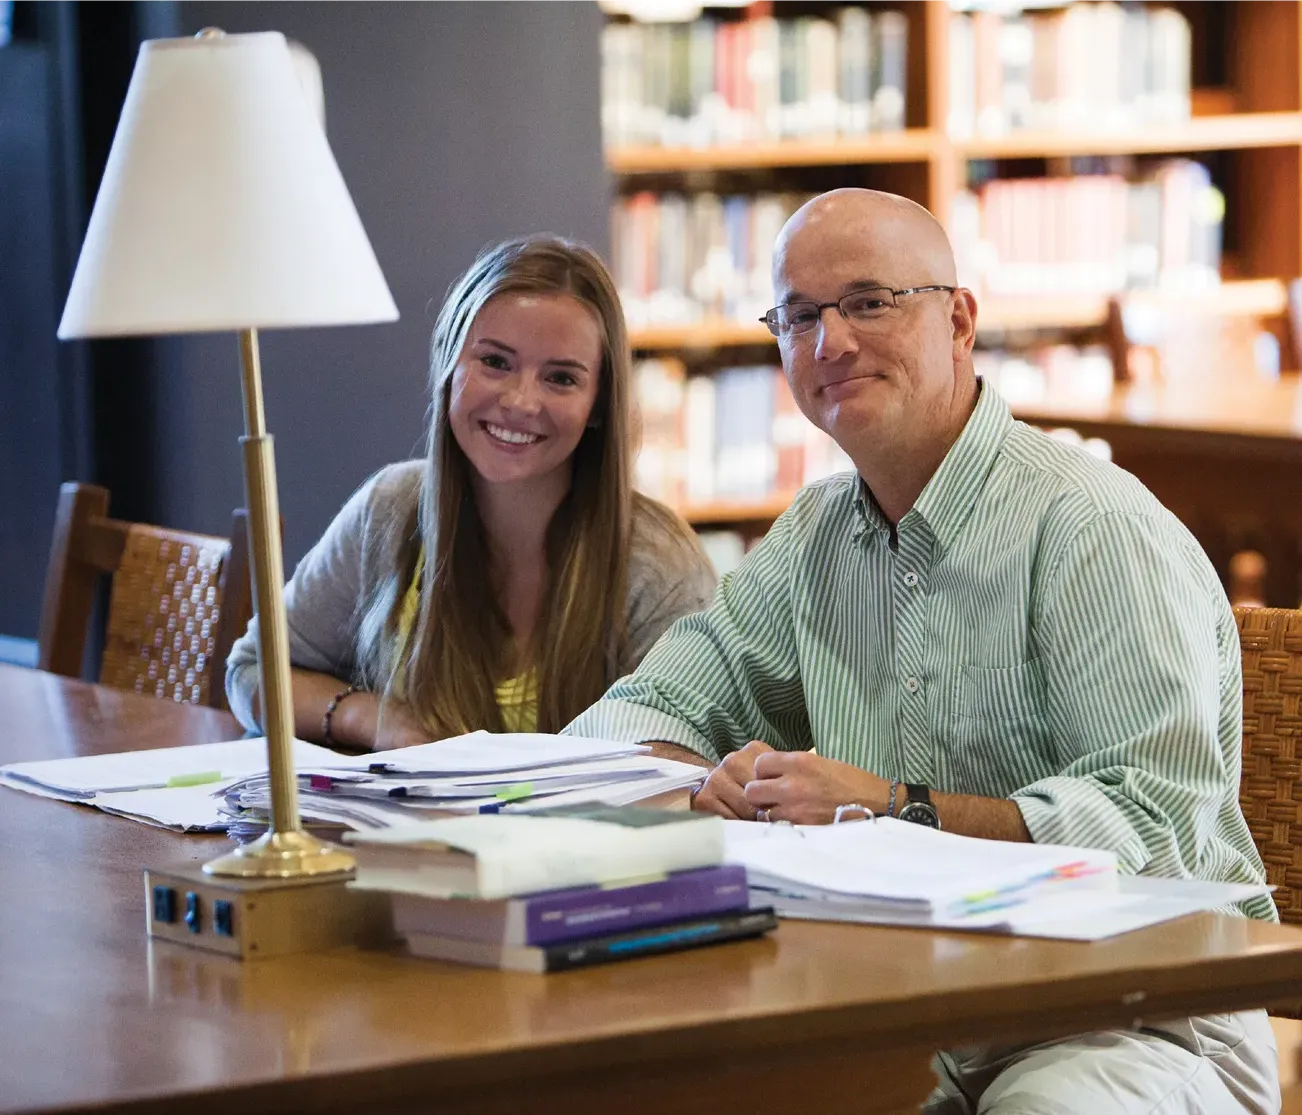 Hannah Van Demark, class of 2015, a Ford Scholar, and her faculty mentor, history professor Robert Brigham, sit at a table filled with books and papers in the Vassar Library.